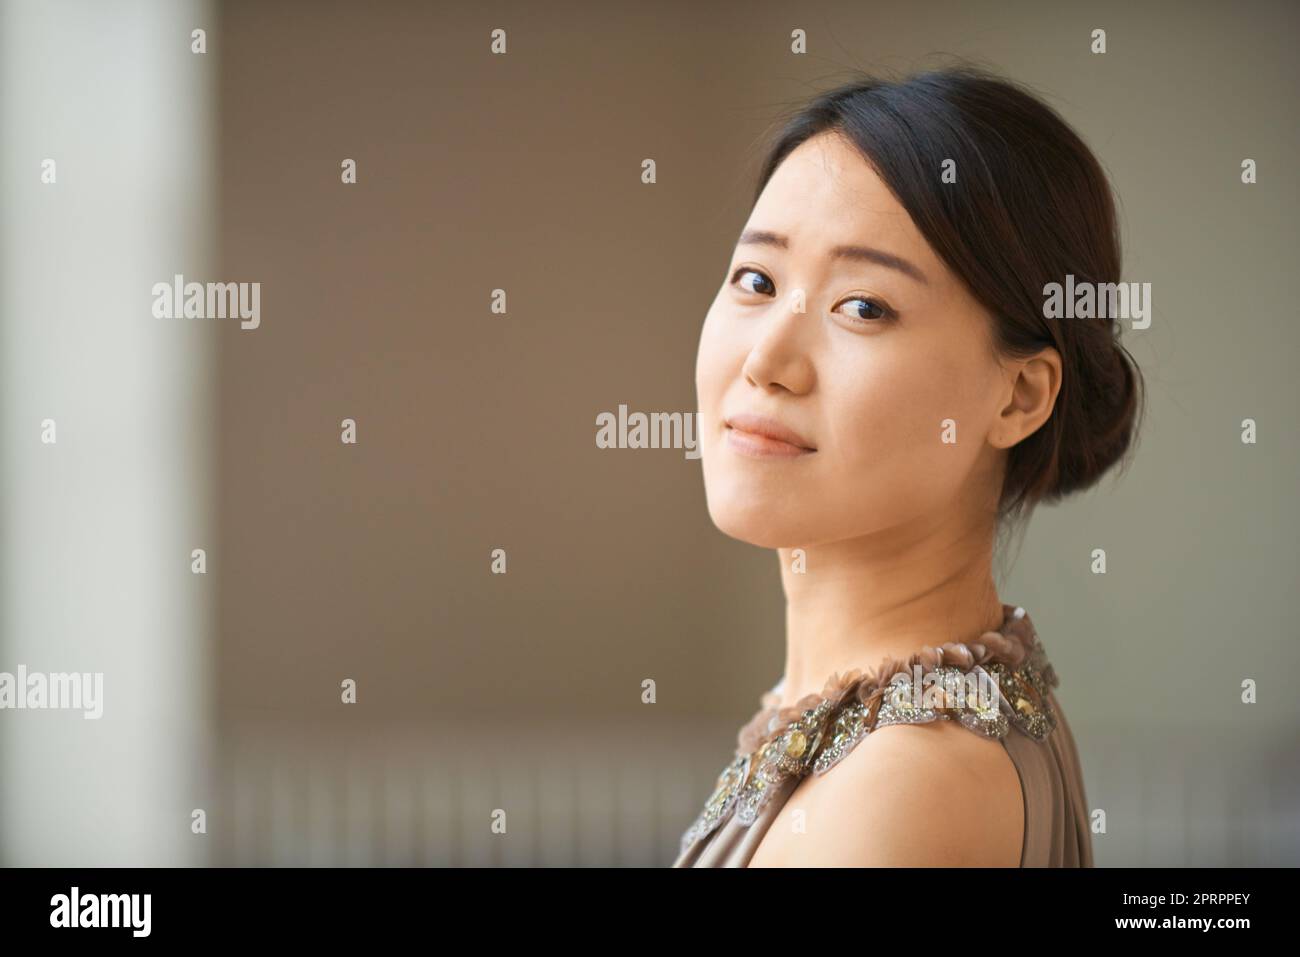 Portrait of perfect elegance. Portrait of an elegantly dressed young woman. Stock Photo